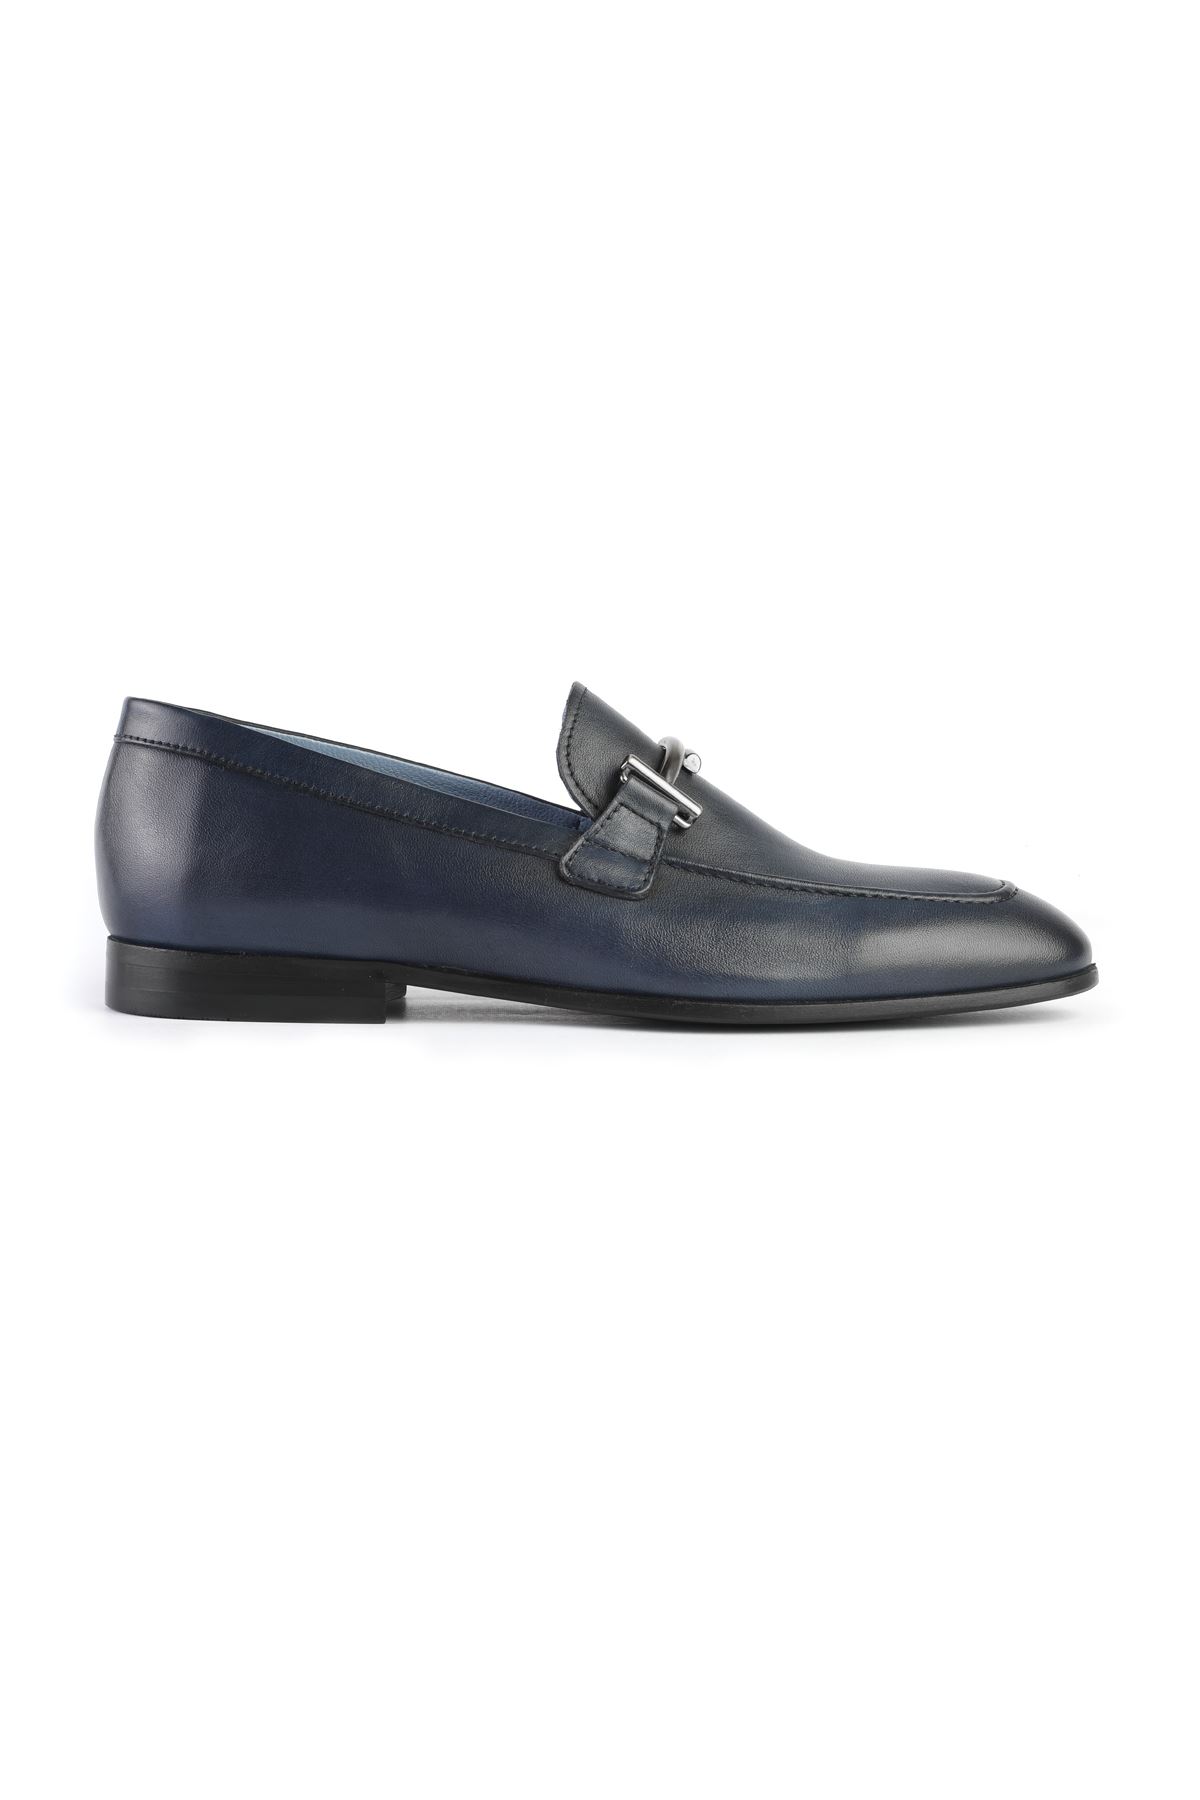 Libero 3270 Navy Blue Loafer Shoes